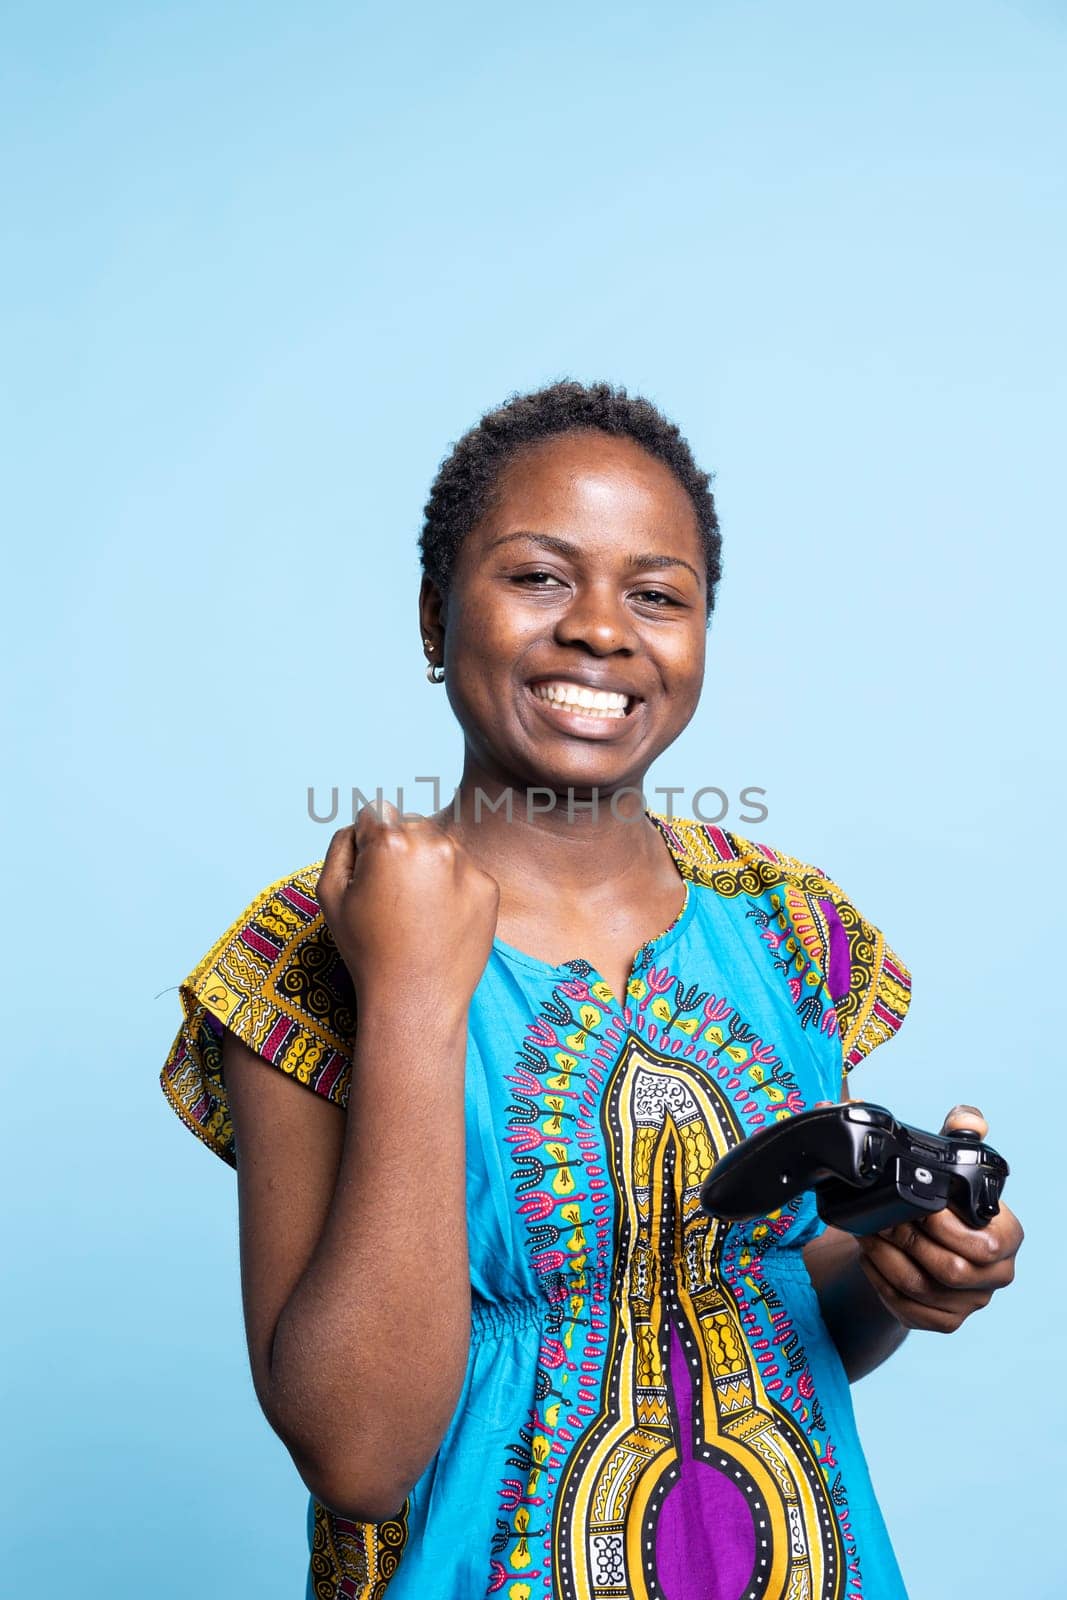 African american smiling person winning videogames competition on camera, enjoying gaming tournament victory and playing with a controller. Positive girl being pleased with her online success.